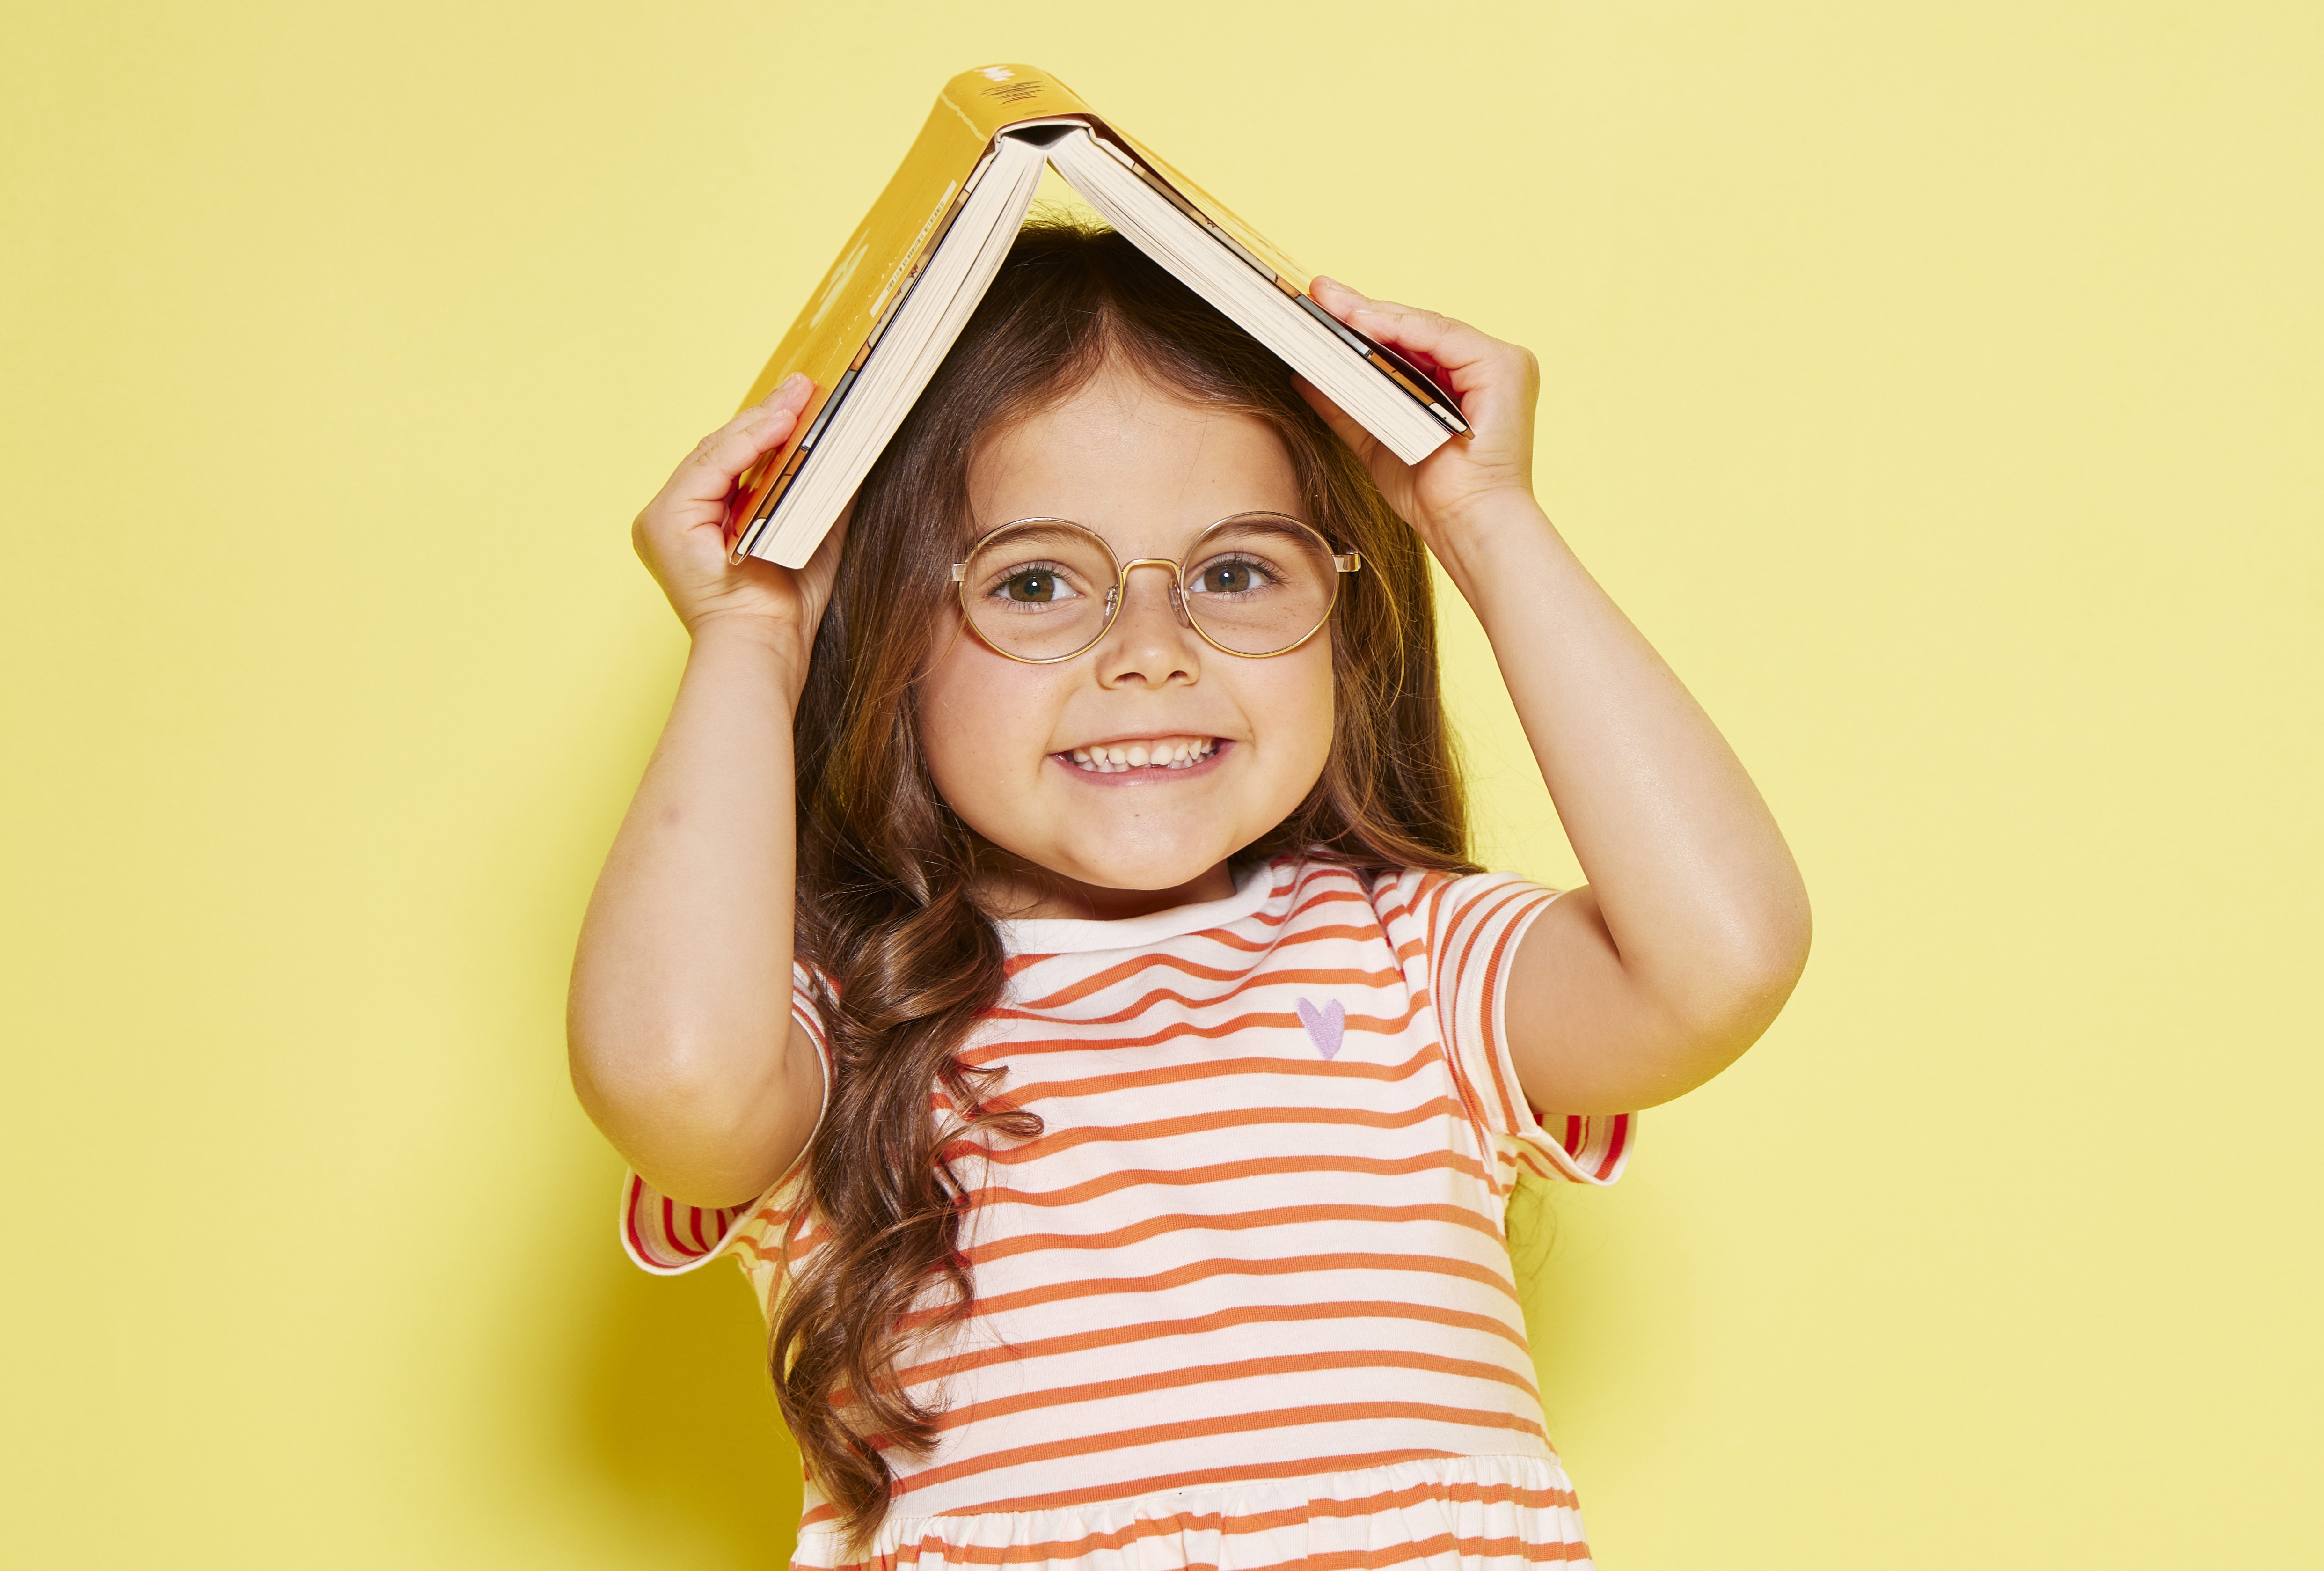 Girl holding open book on her hand with a yellow background.